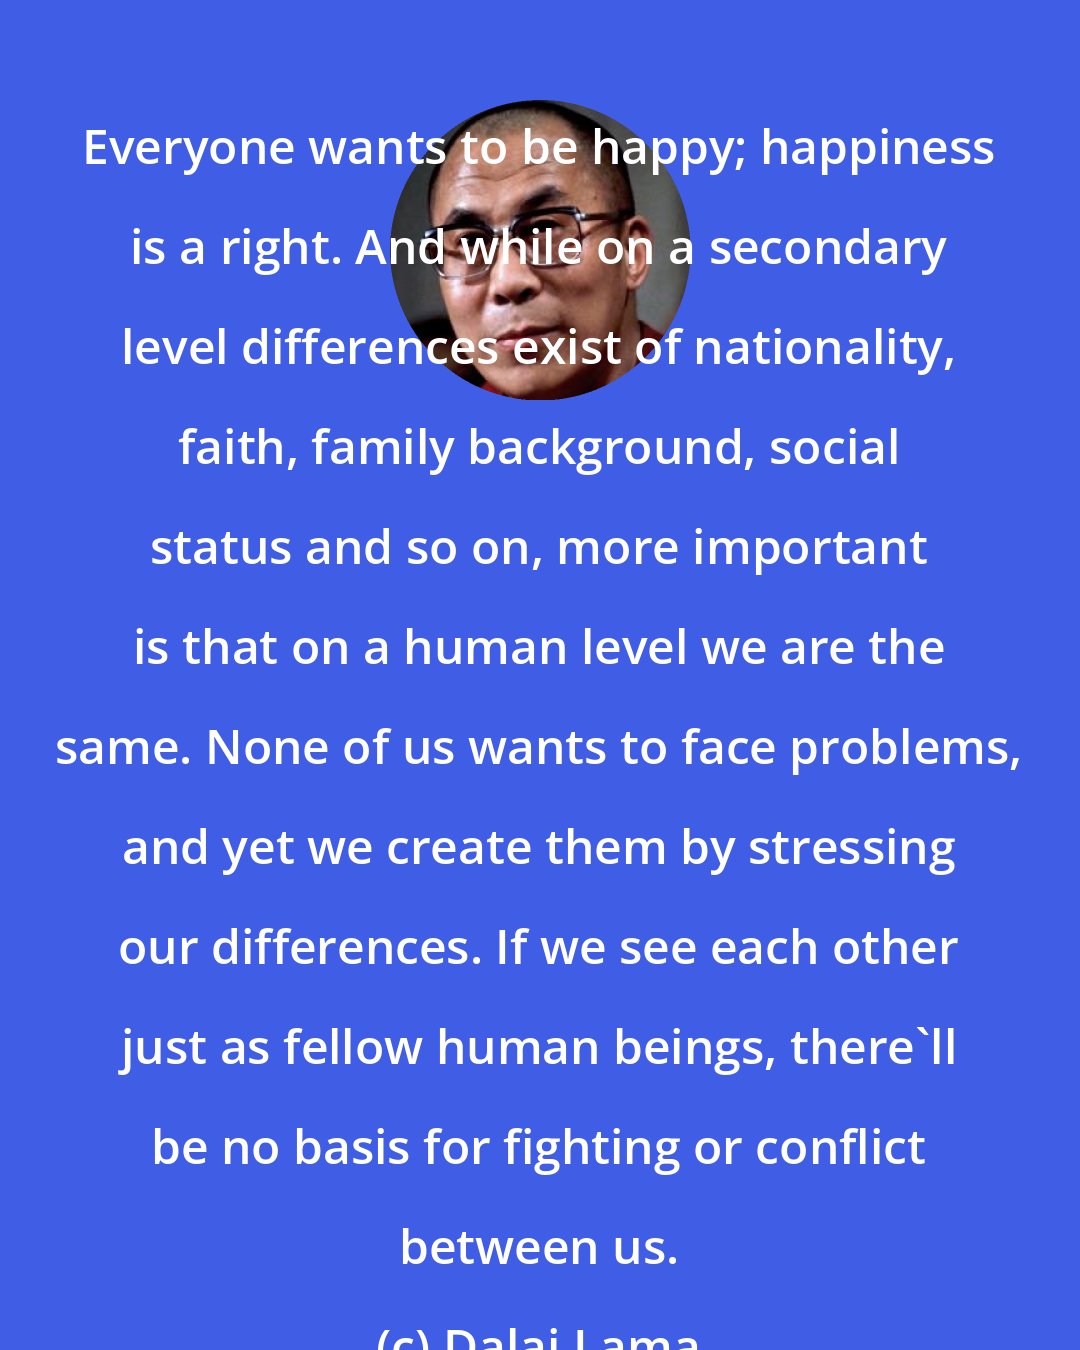 Dalai Lama: Everyone wants to be happy; happiness is a right. And while on a secondary level differences exist of nationality, faith, family background, social status and so on, more important is that on a human level we are the same. None of us wants to face problems, and yet we create them by stressing our differences. If we see each other just as fellow human beings, there'll be no basis for fighting or conflict between us.